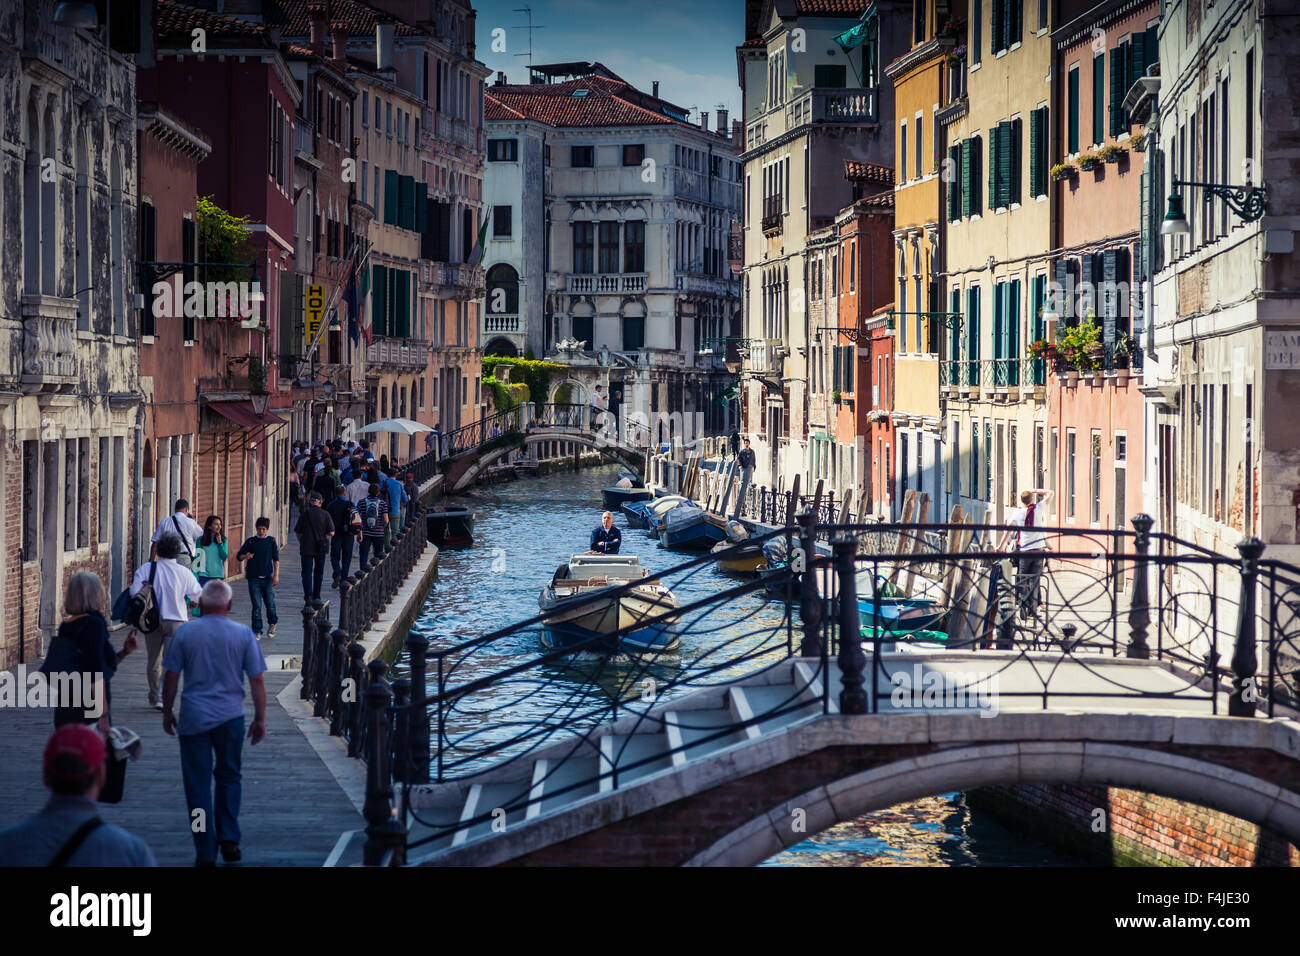 Boats and gondola on canals in Venice Stock Photo